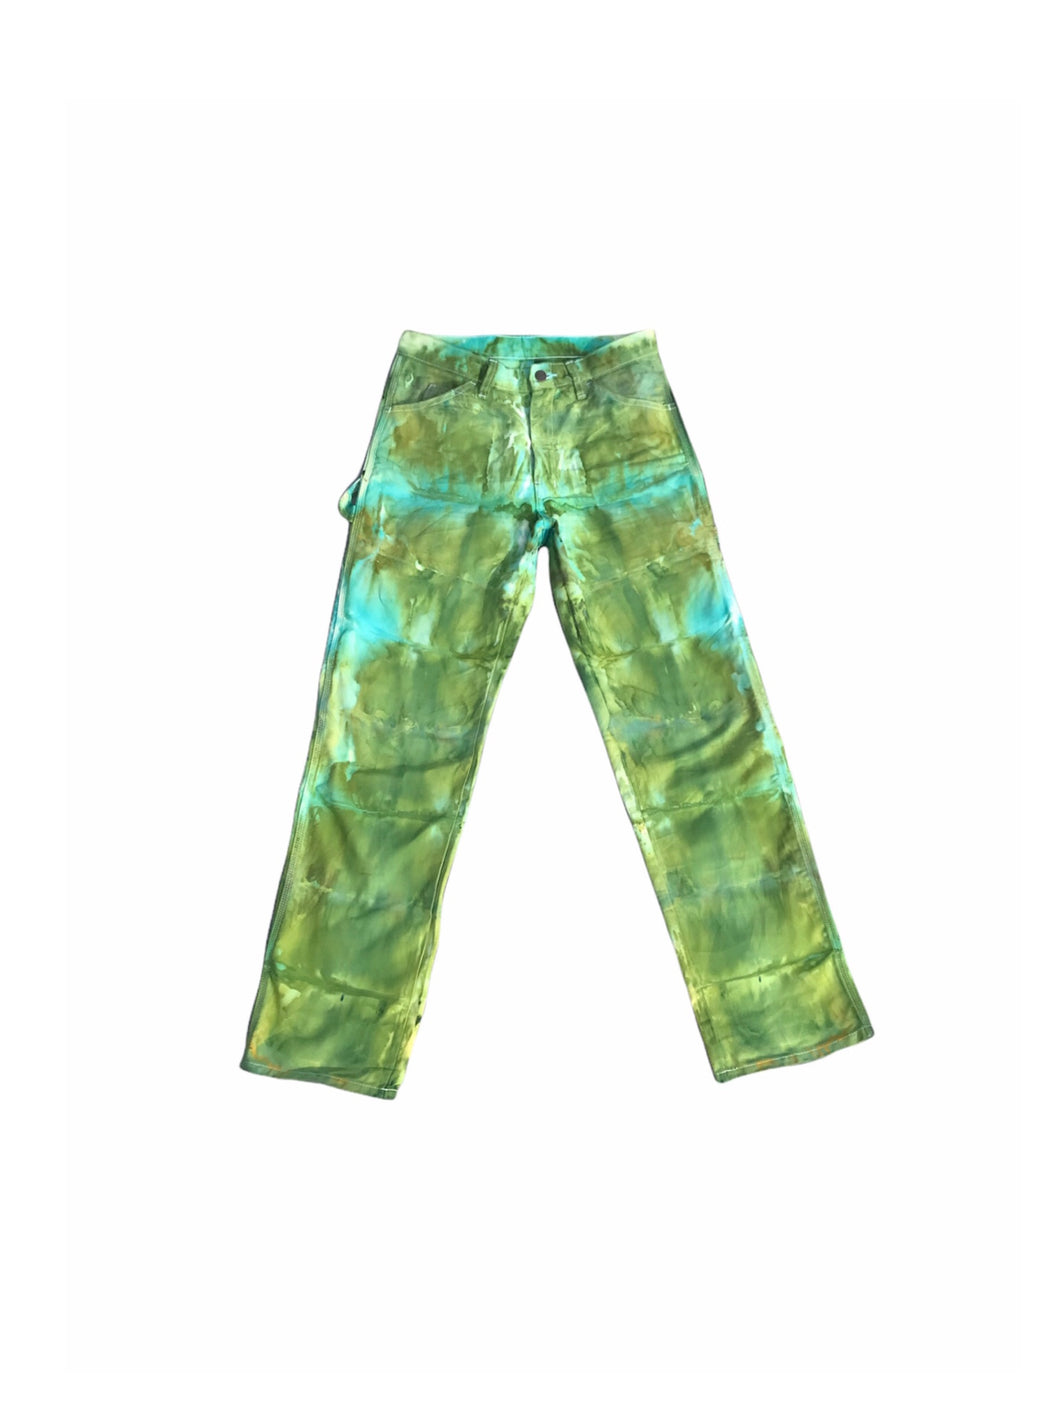 Hand-Dyed Psychedelic Pant (Green/Turquoise)